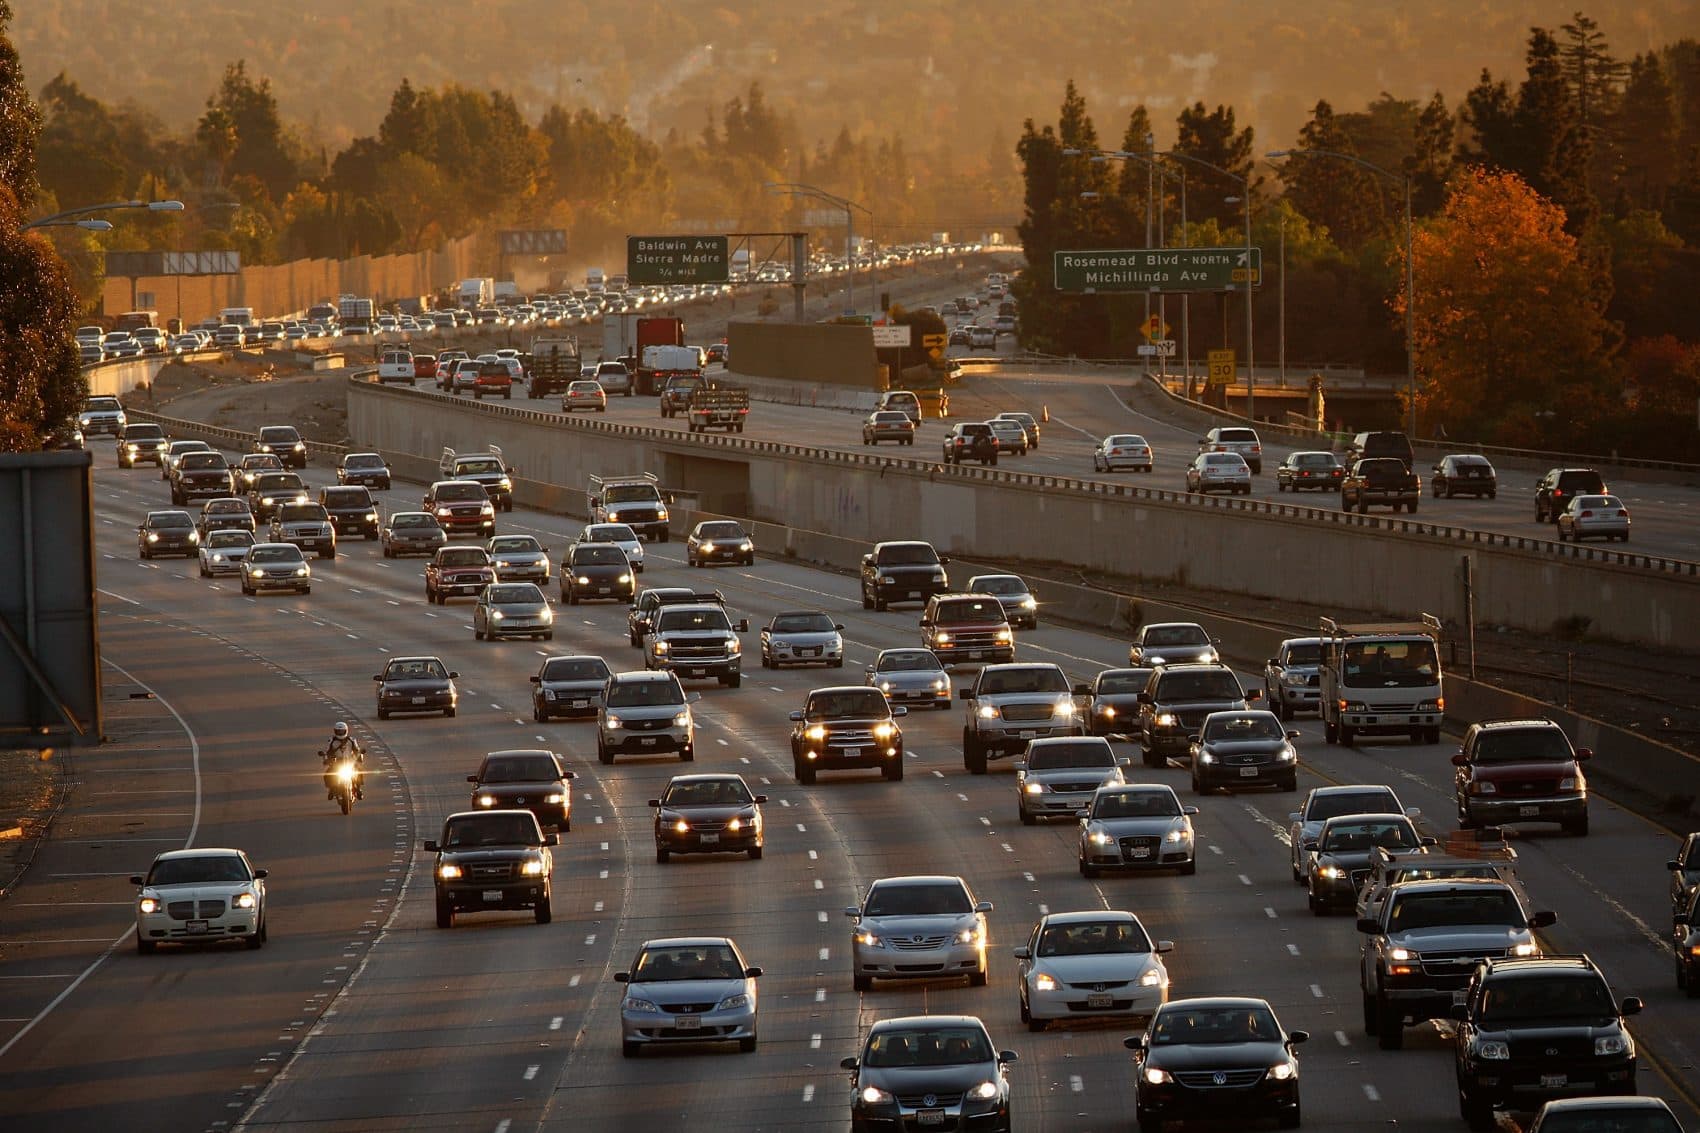 Morning commuters travel the 210 freeway between Los Angeles and cities to the east on Dec. 1, 2009, near Pasadena, Calif. (David McNew/Getty Images)